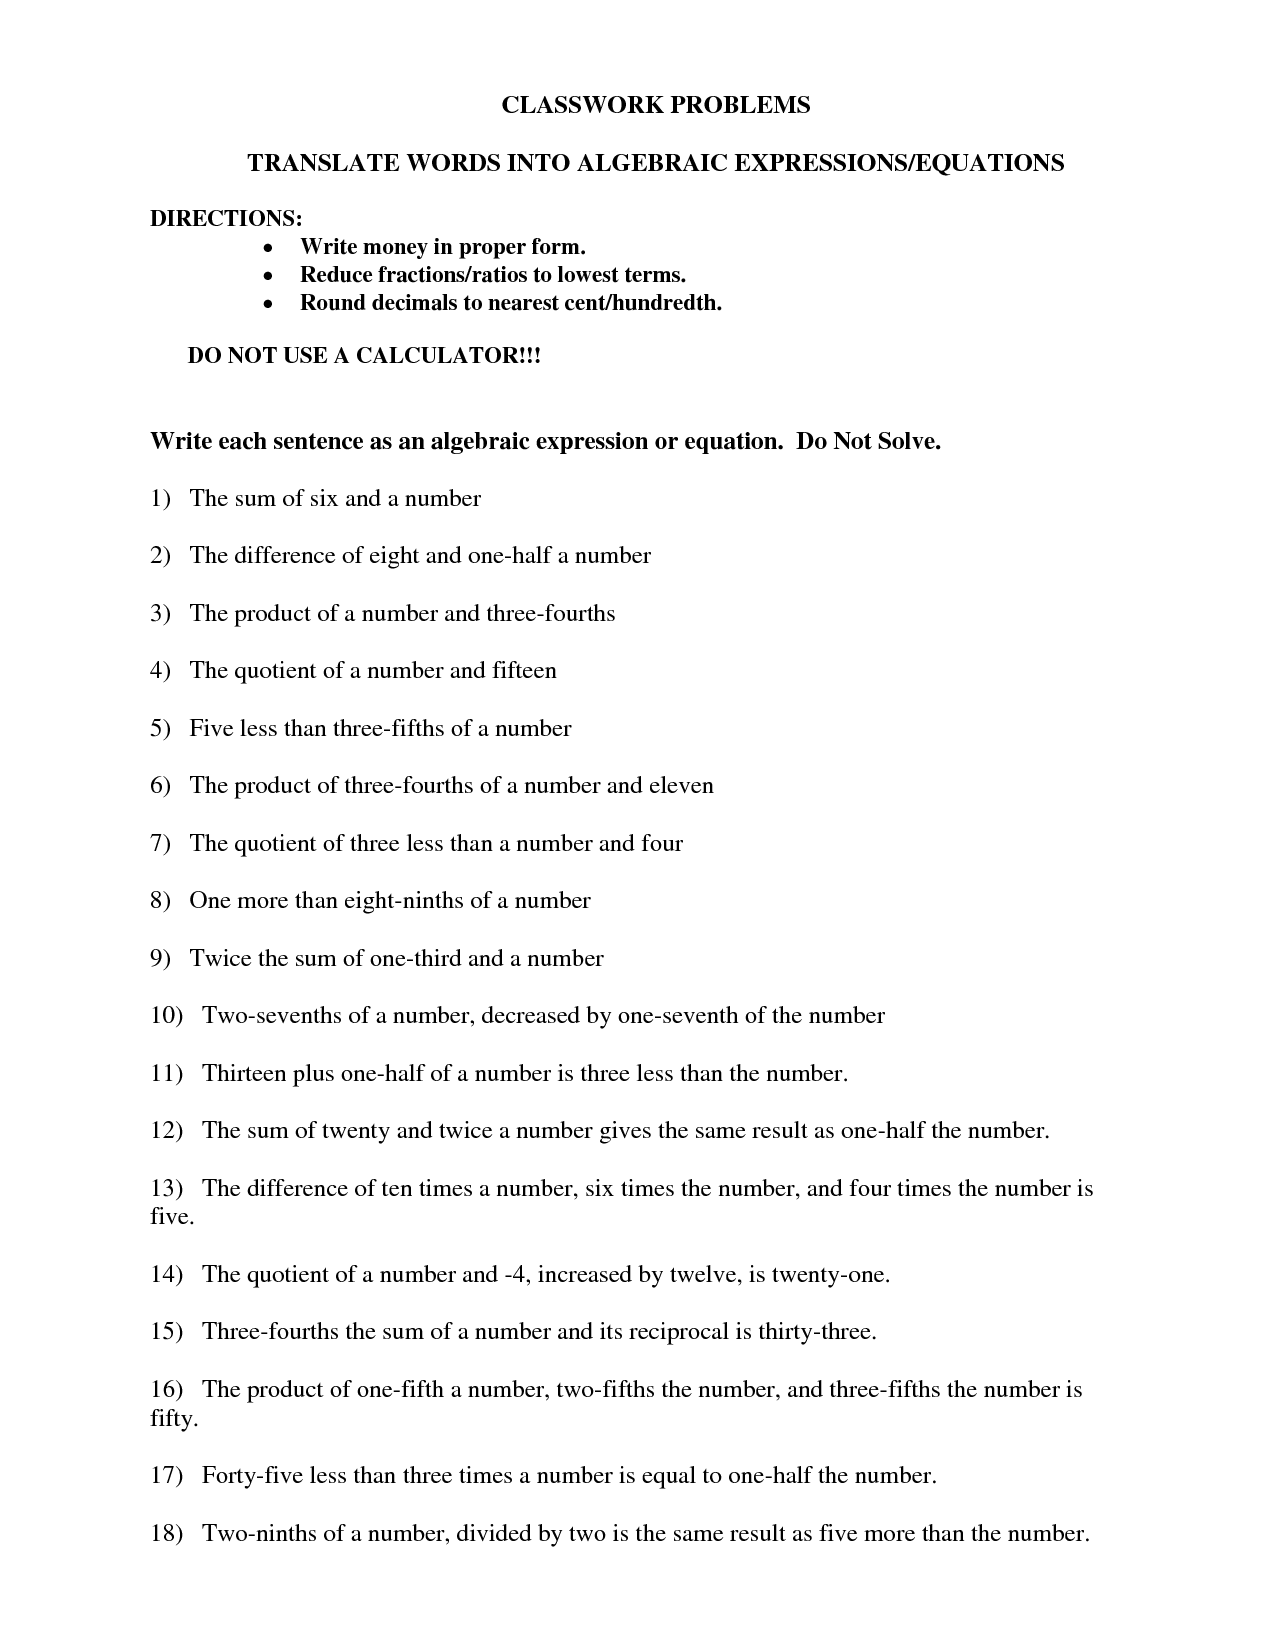 16 Best Images Of Translating Verbal Expressions Worksheets Translating Algebraic Expressions